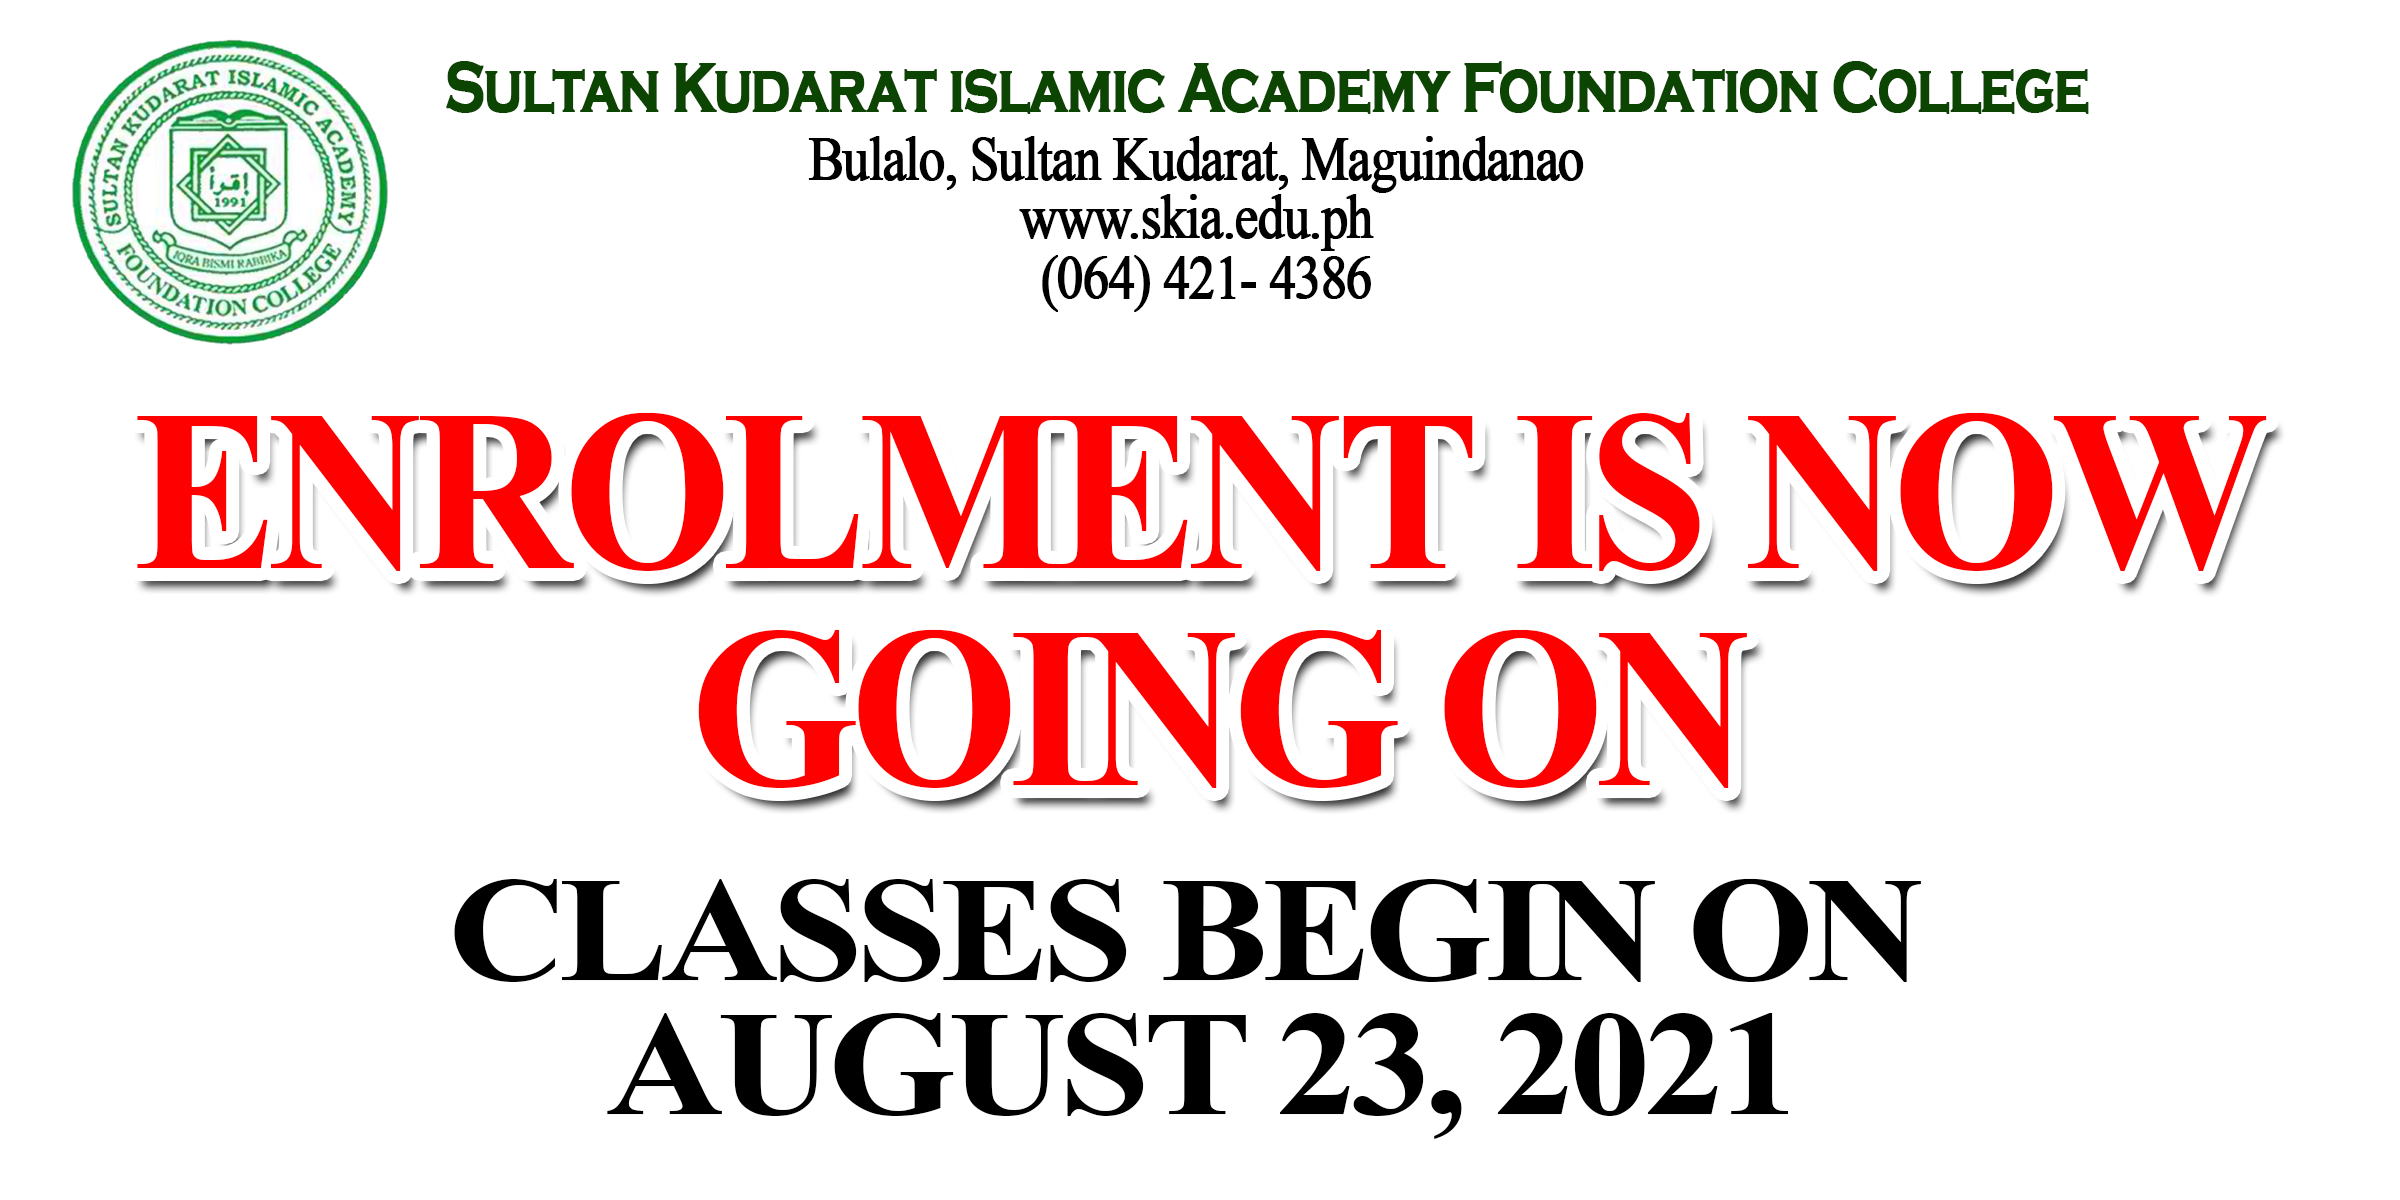 ENROLLMENT IS NOW GOING ON FOR S.Y. 2021-2022!